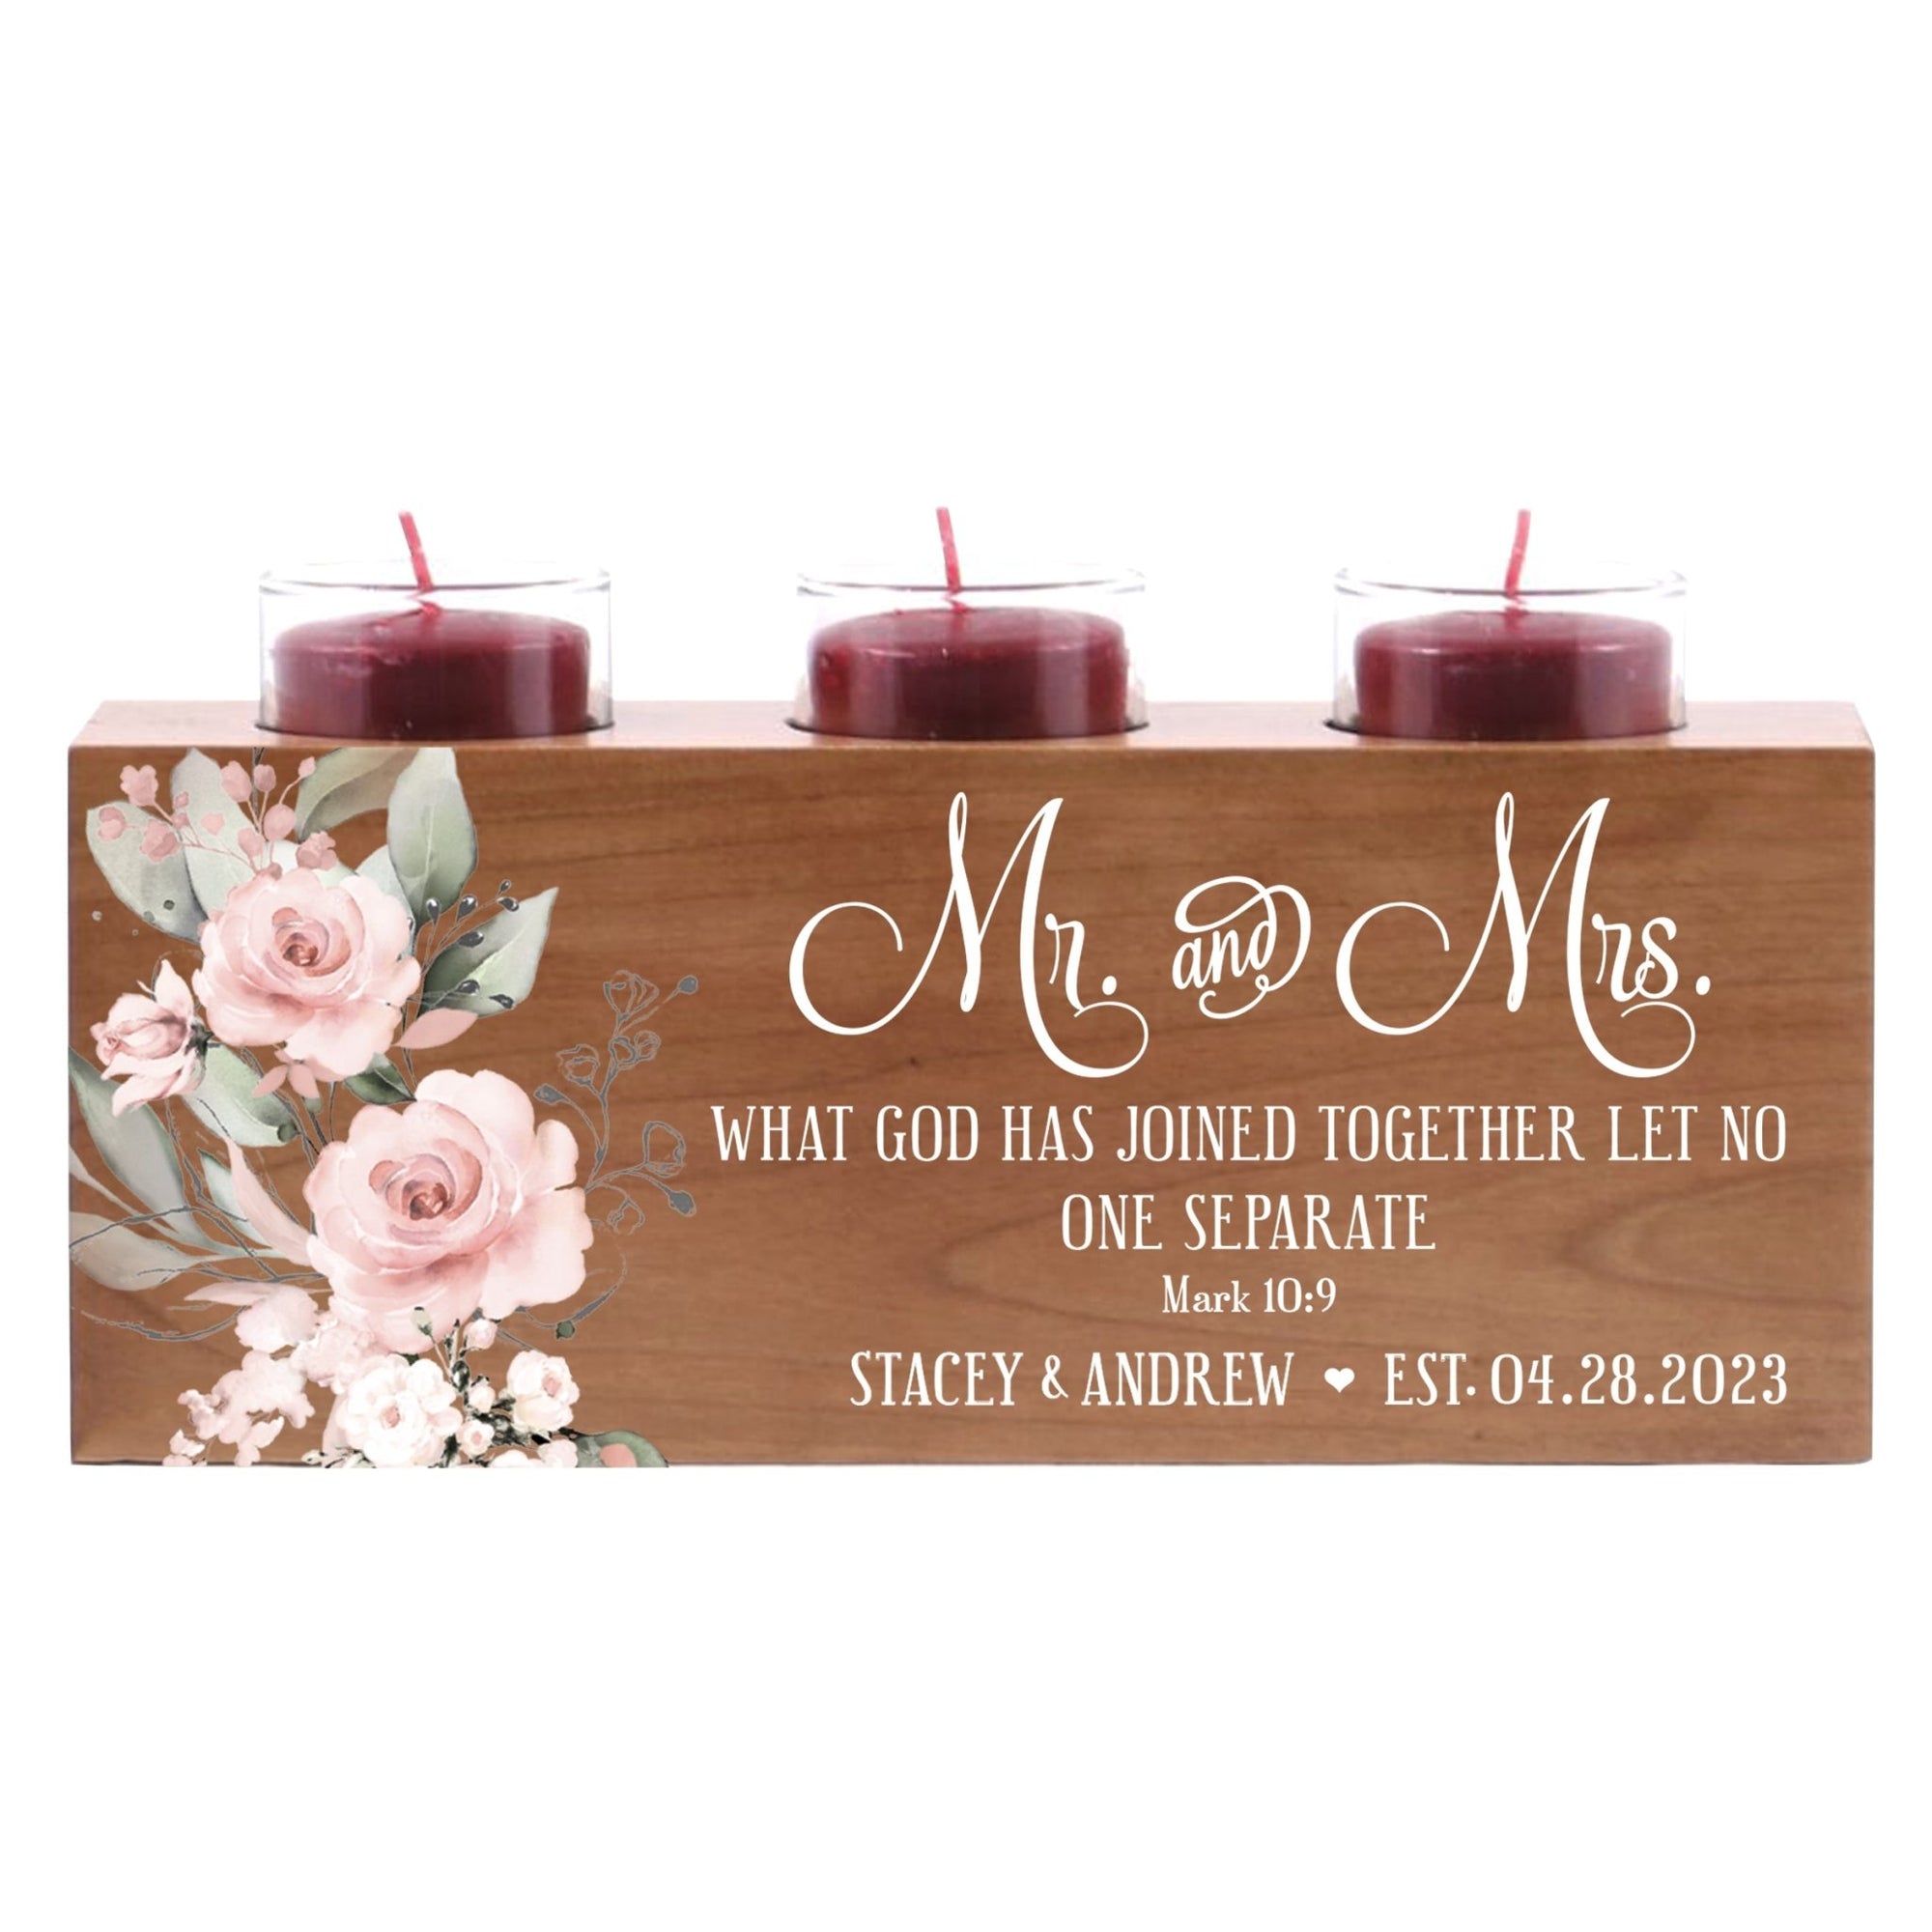 Personalized Rustic Wooden Candle Holder With Tealight Glass Votives Home Décor And Gift Ideas - What Has God Joined Together - LifeSong Milestones